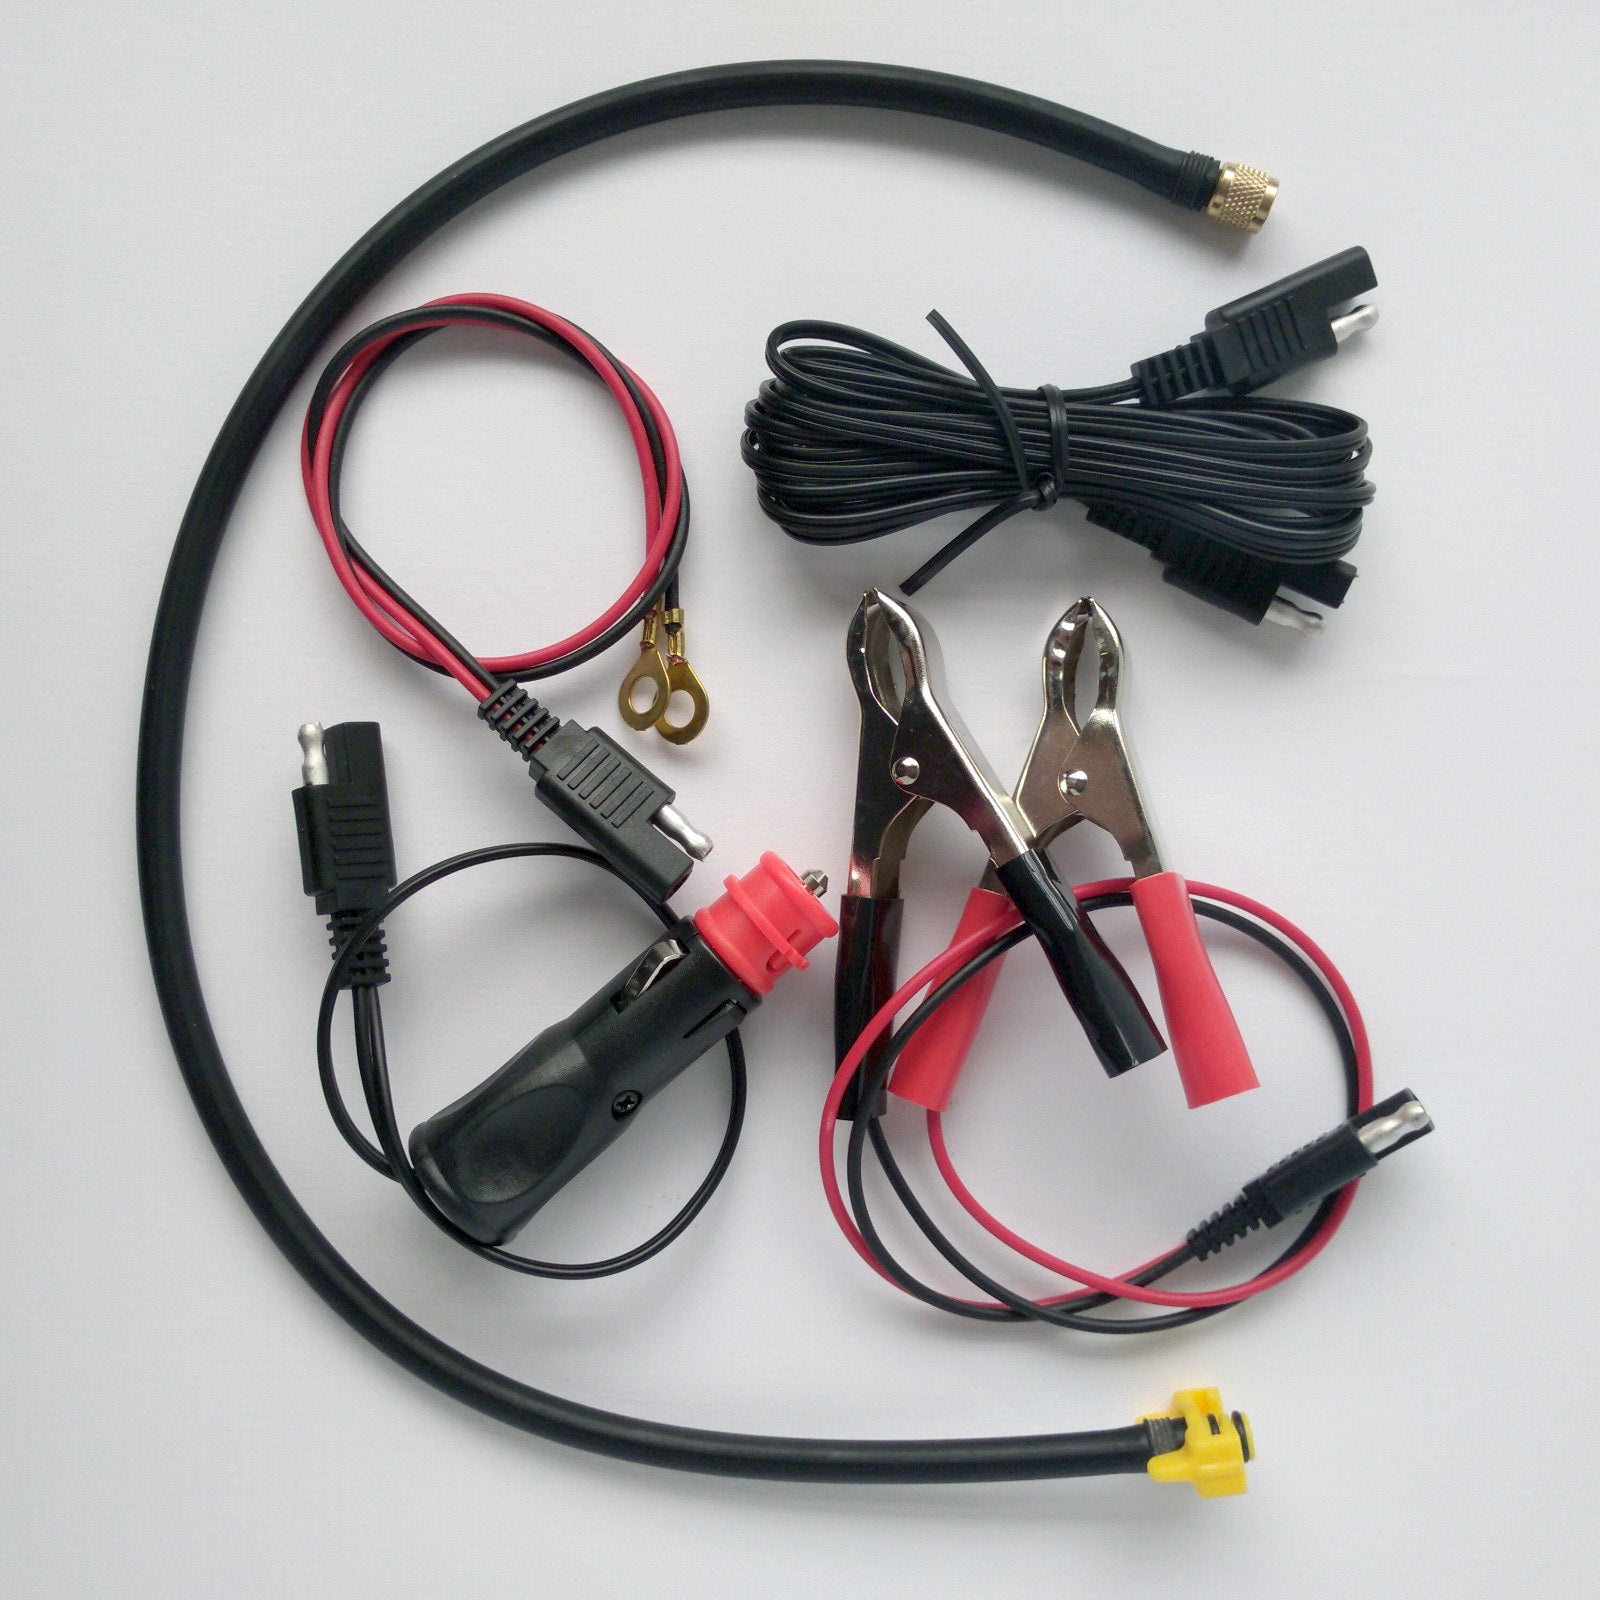 The Motoflator Accessories: inflation tube, power cables and cigarette lighter plug